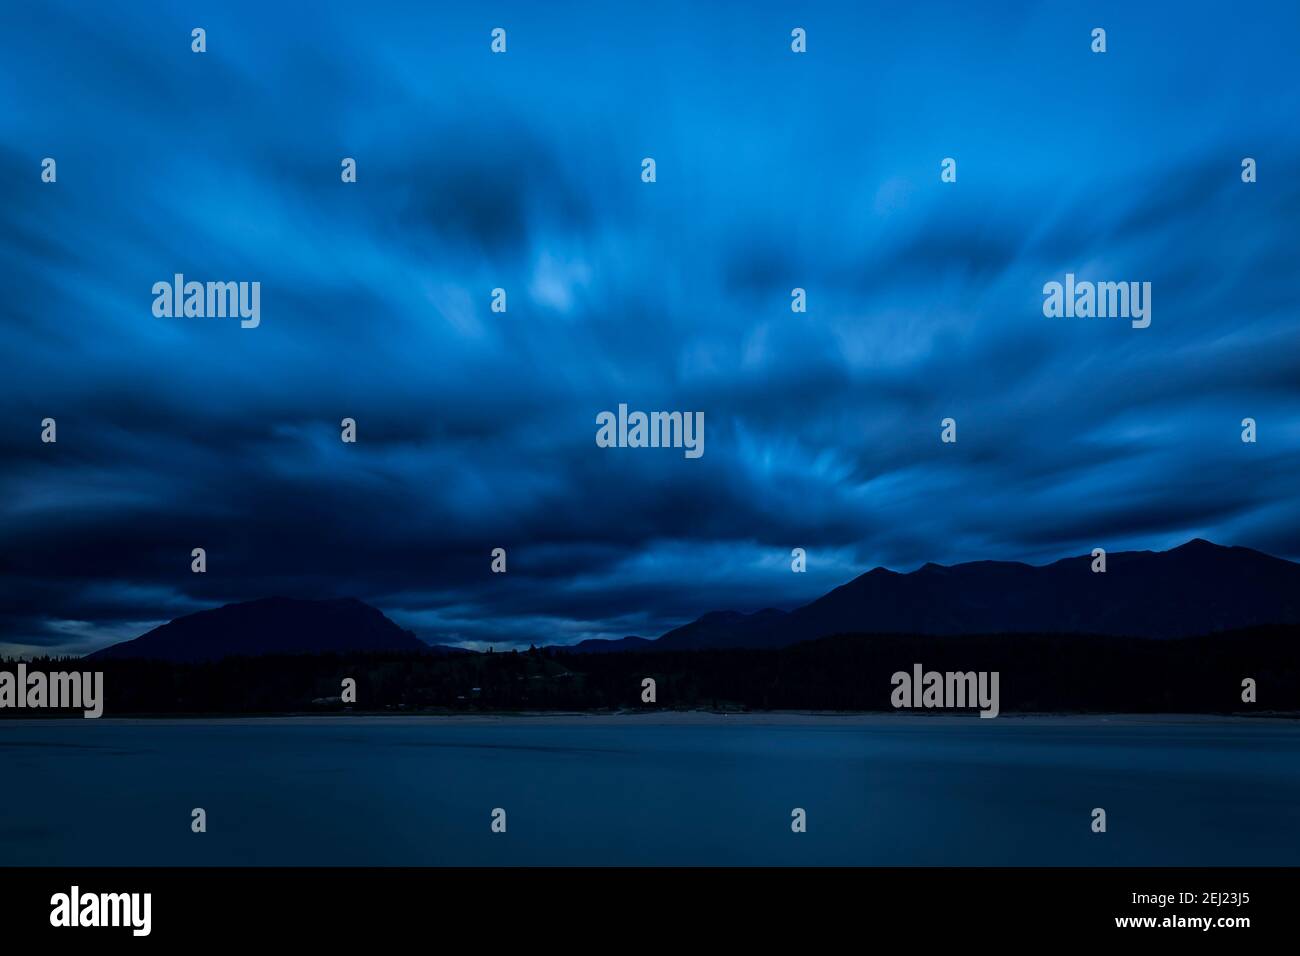 Long exposure blue hour landscape with a looming cloudy sky, Lake Koocanusa on the foreground and mountains on the background, BC, Canada Stock Photo